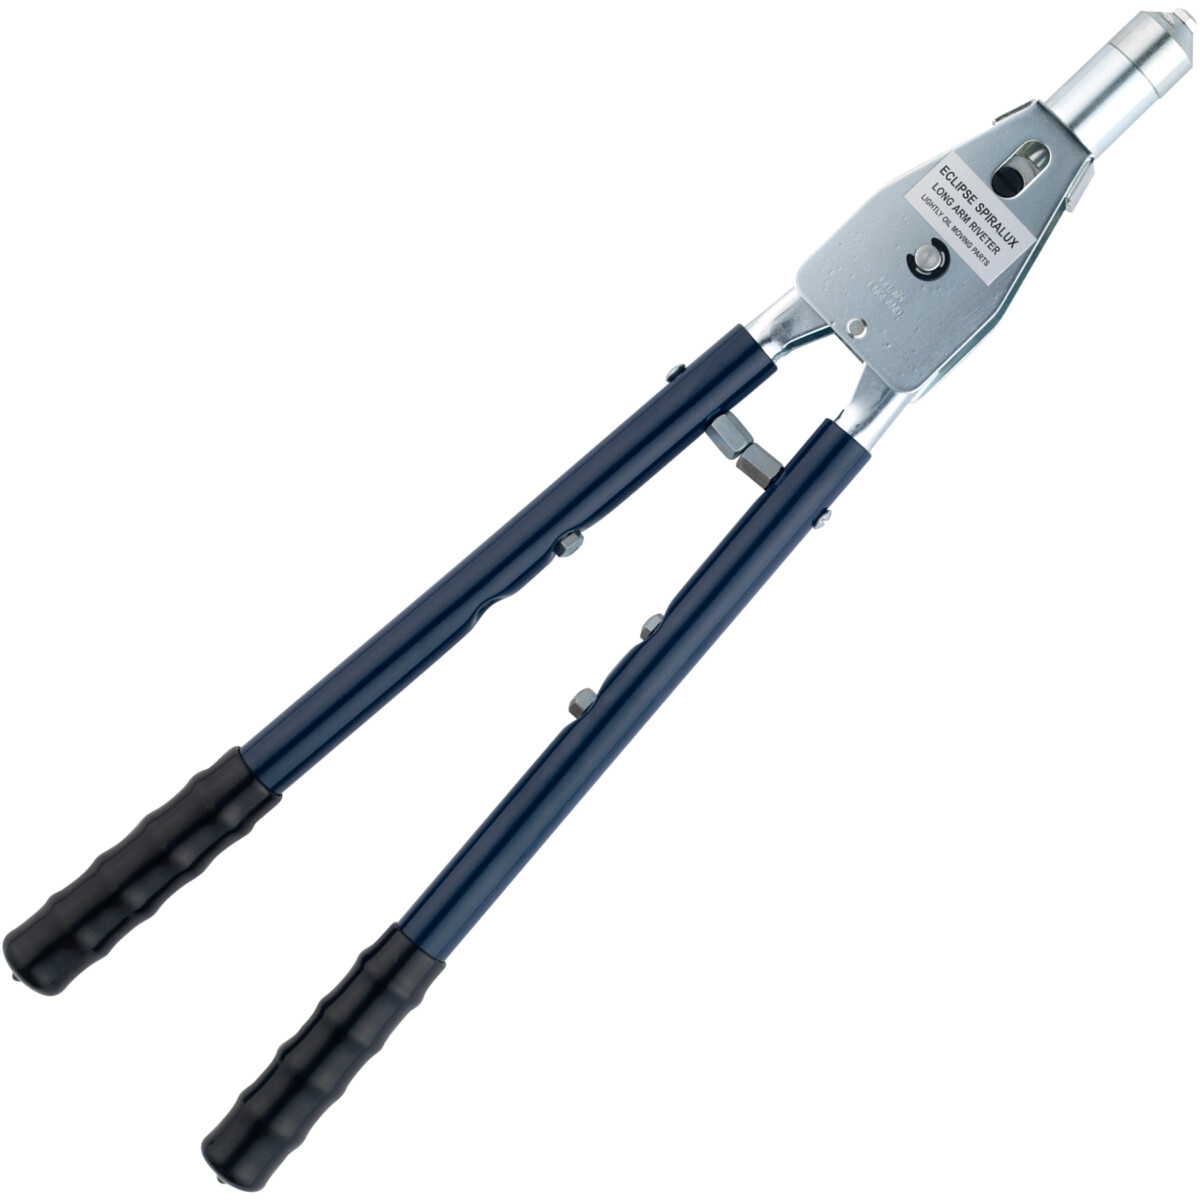 Eclipse 2760 Long Arm Riveter from Lawson HIS